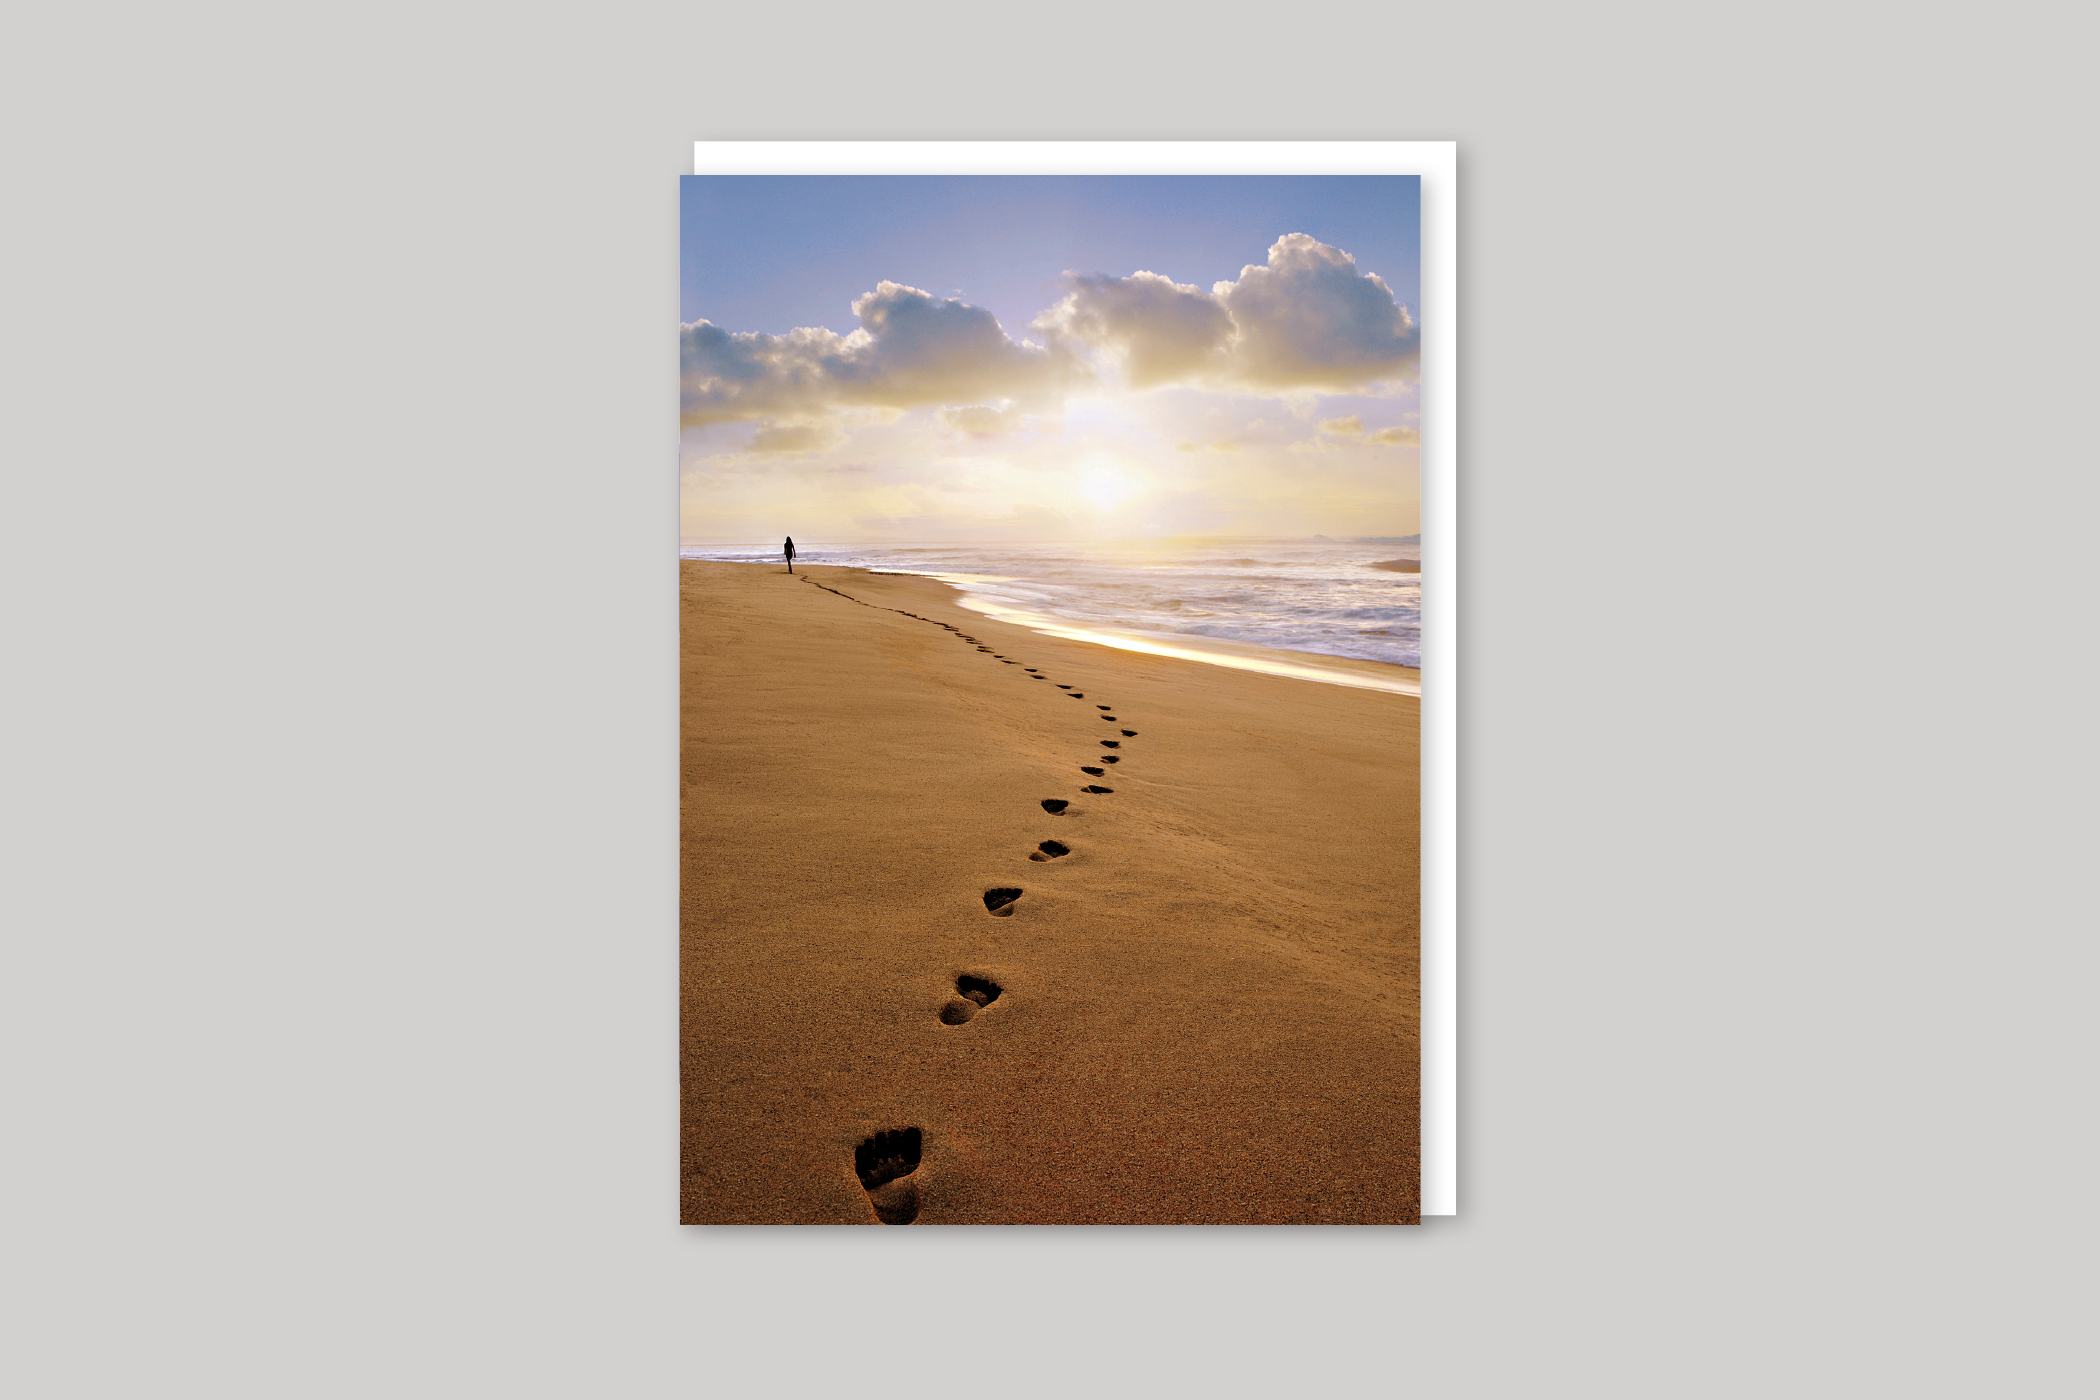 Footprints sympathy card from Exposure range of photographic cards by Icon, back page.